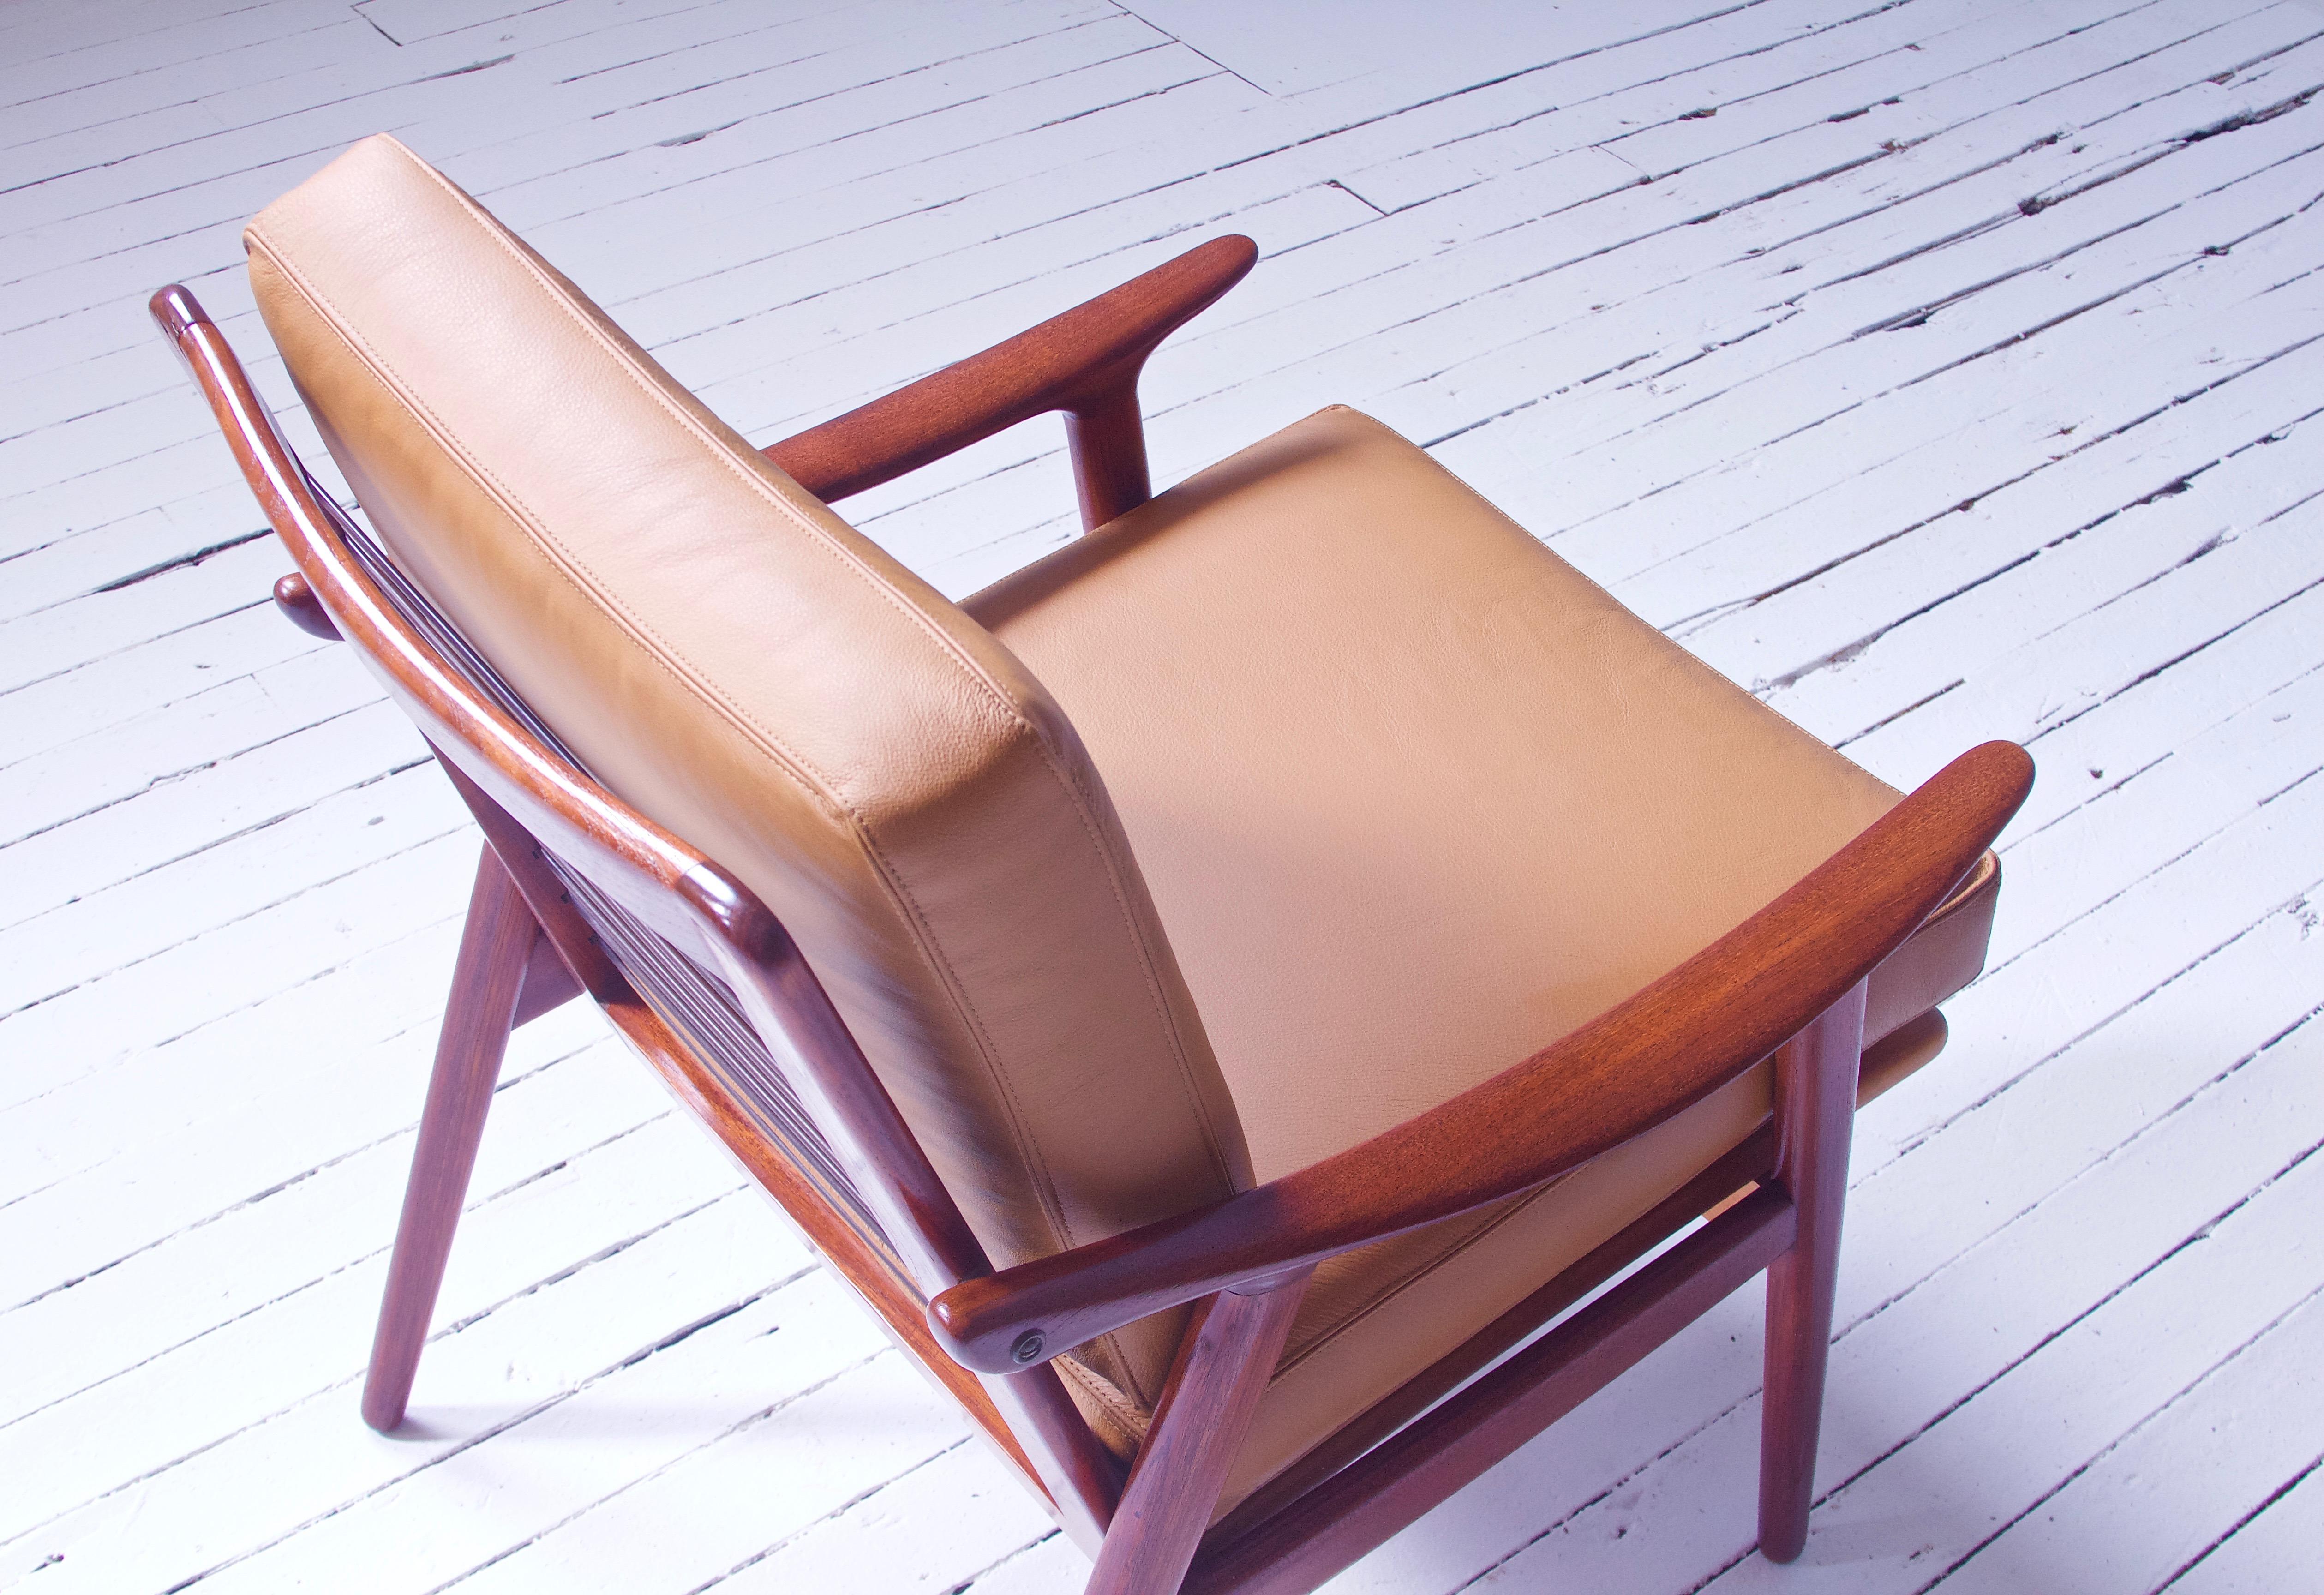 Woodwork Vintage Fredrik A. Kayser Teak, Leather & Brass Easy Chair #563, Norway, 1950s For Sale